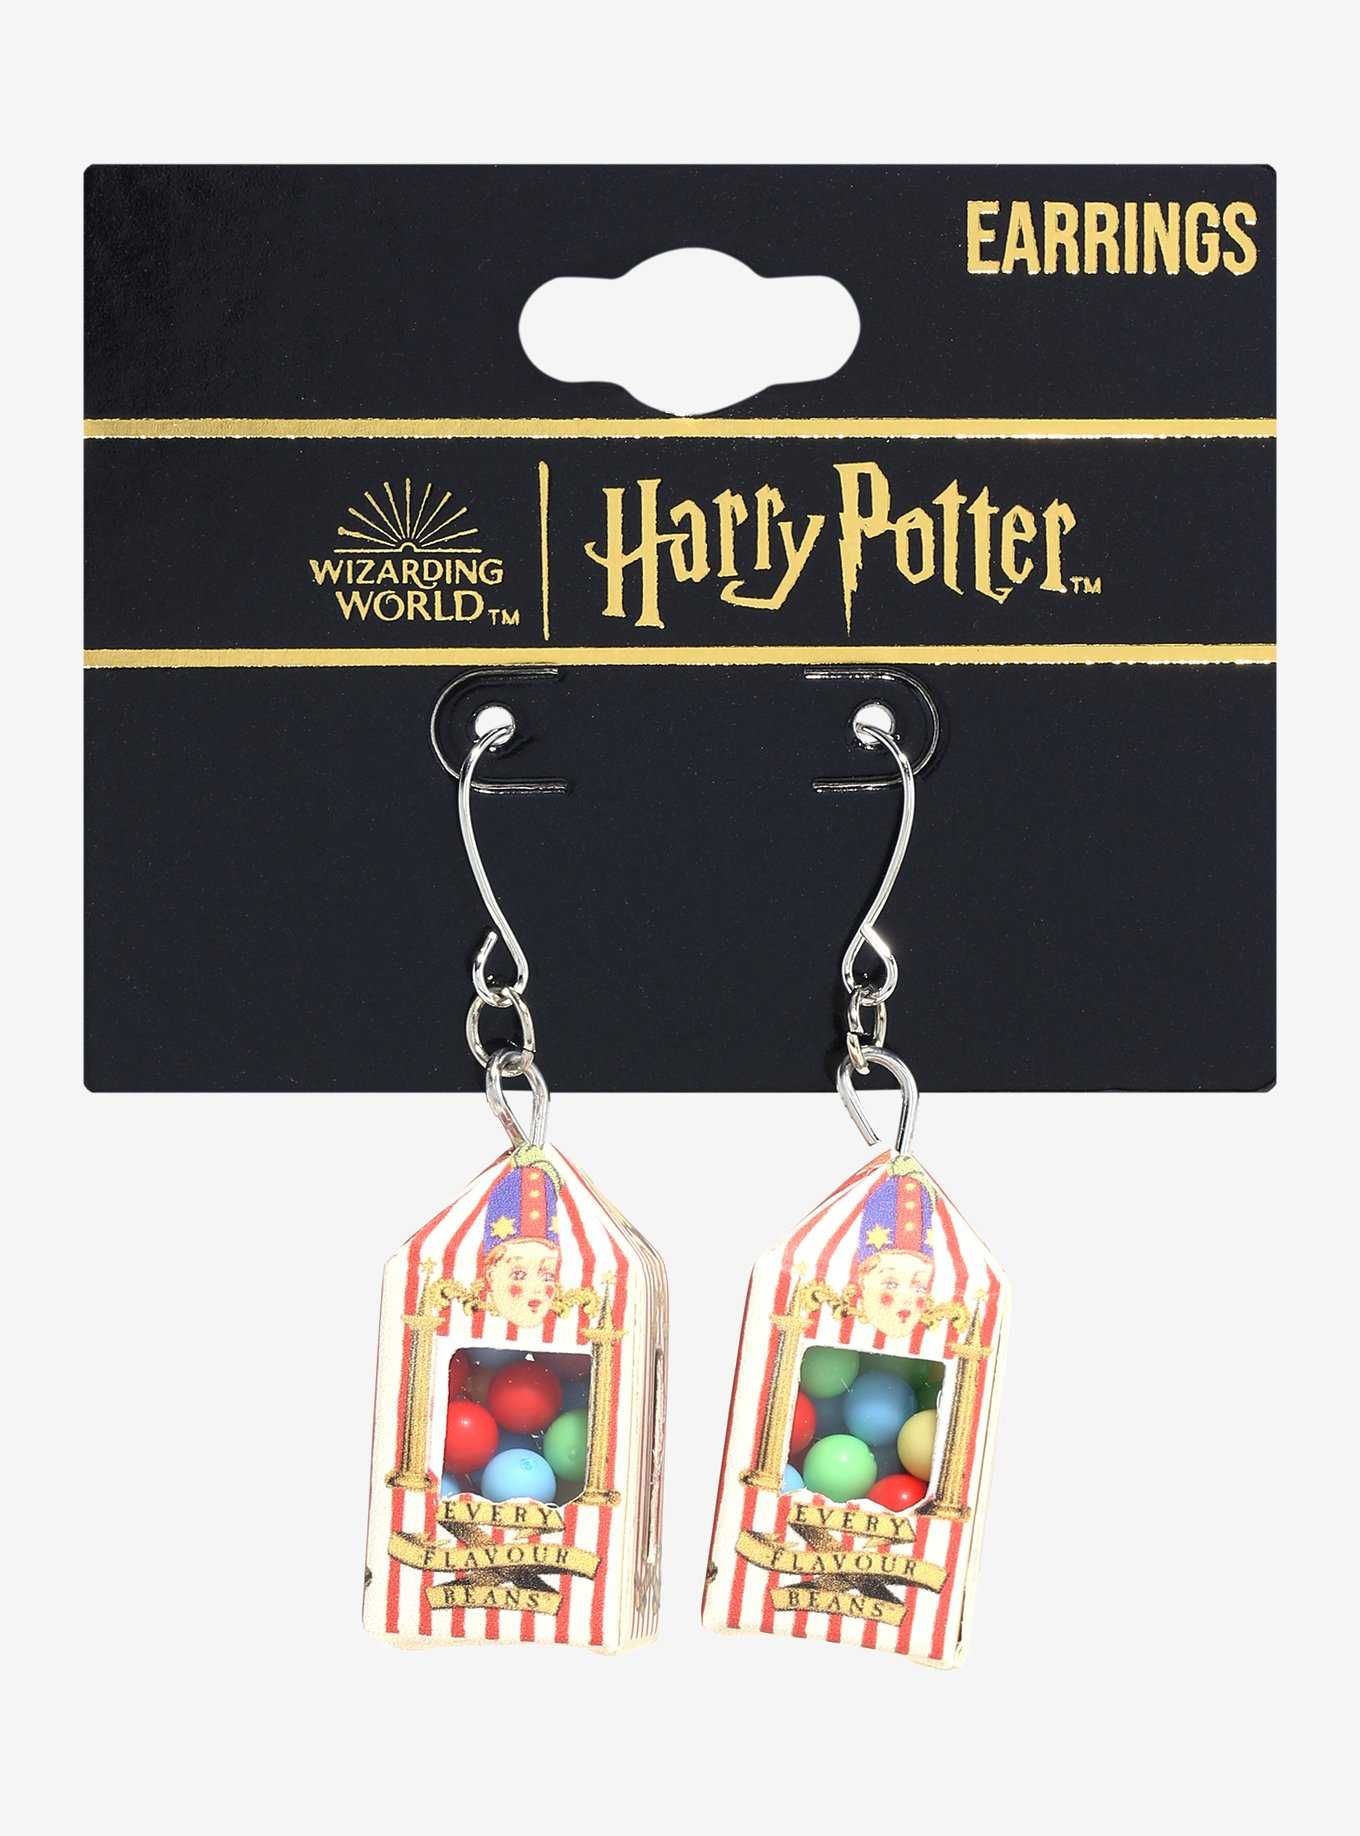 $25 jewels available on .com  Harry potter potions, Harry potter  diy, Harry potter crafts